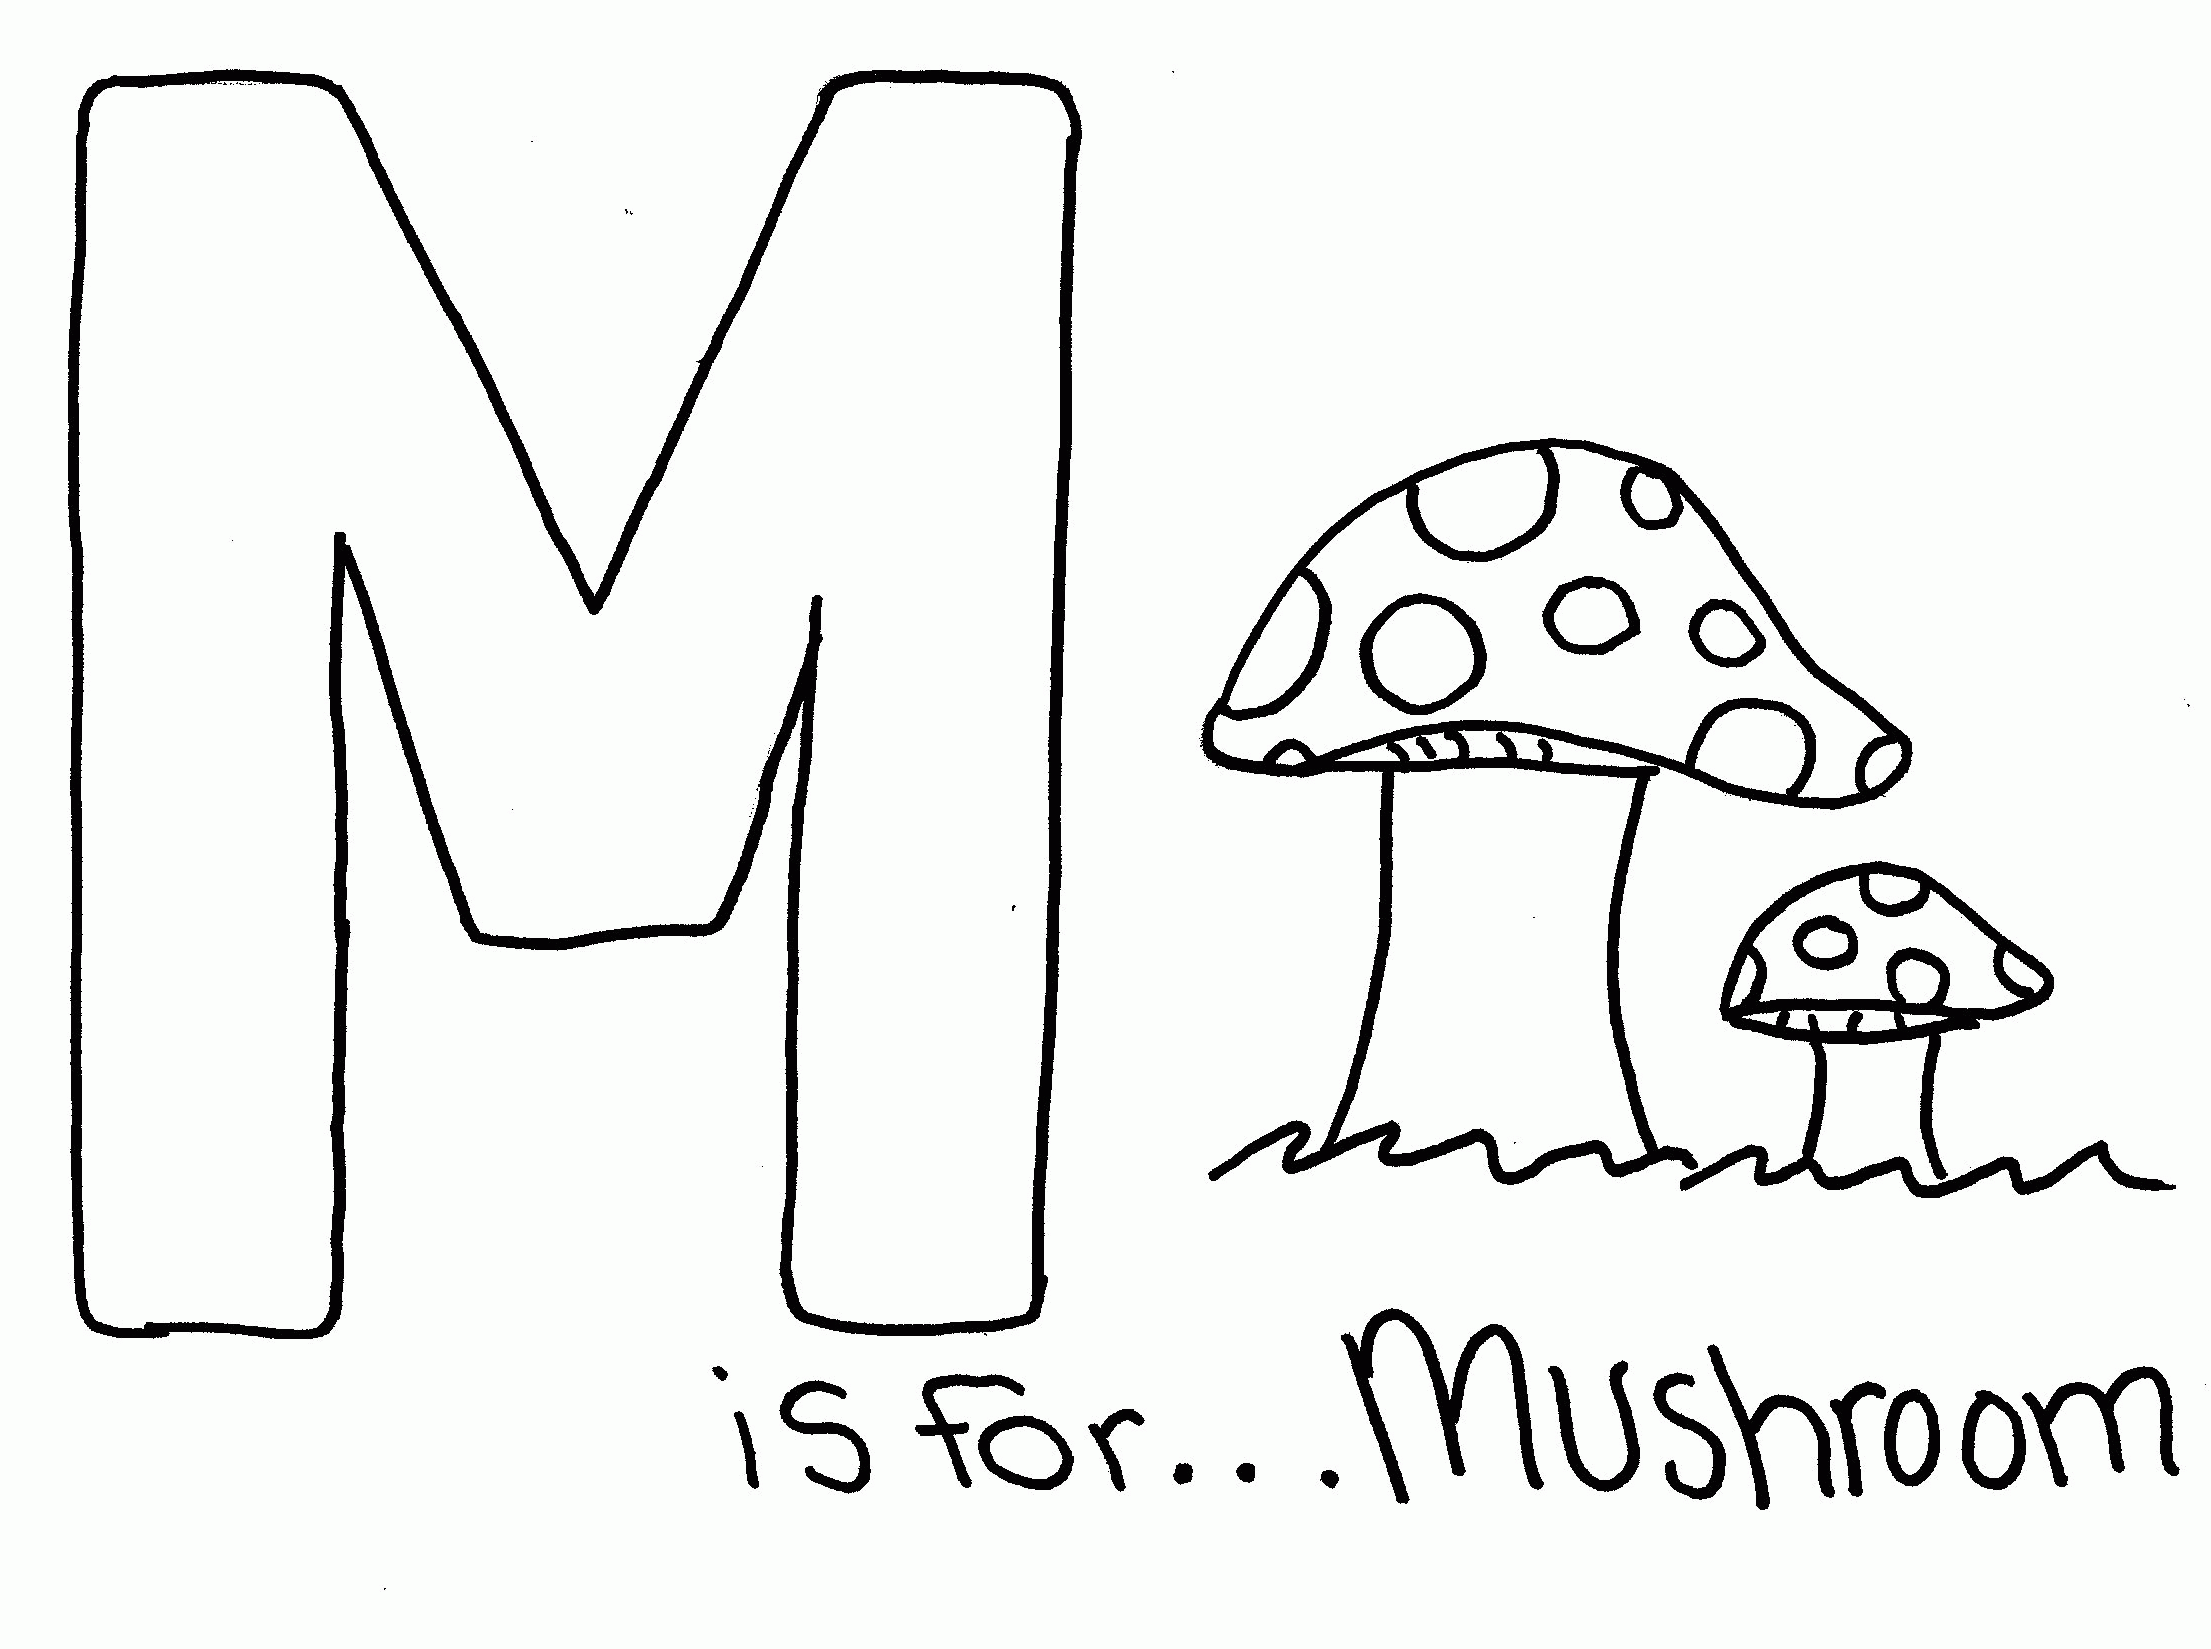 Funny Alphabet With Mushrooms Image Coloring Pages For Kids #e3R ...